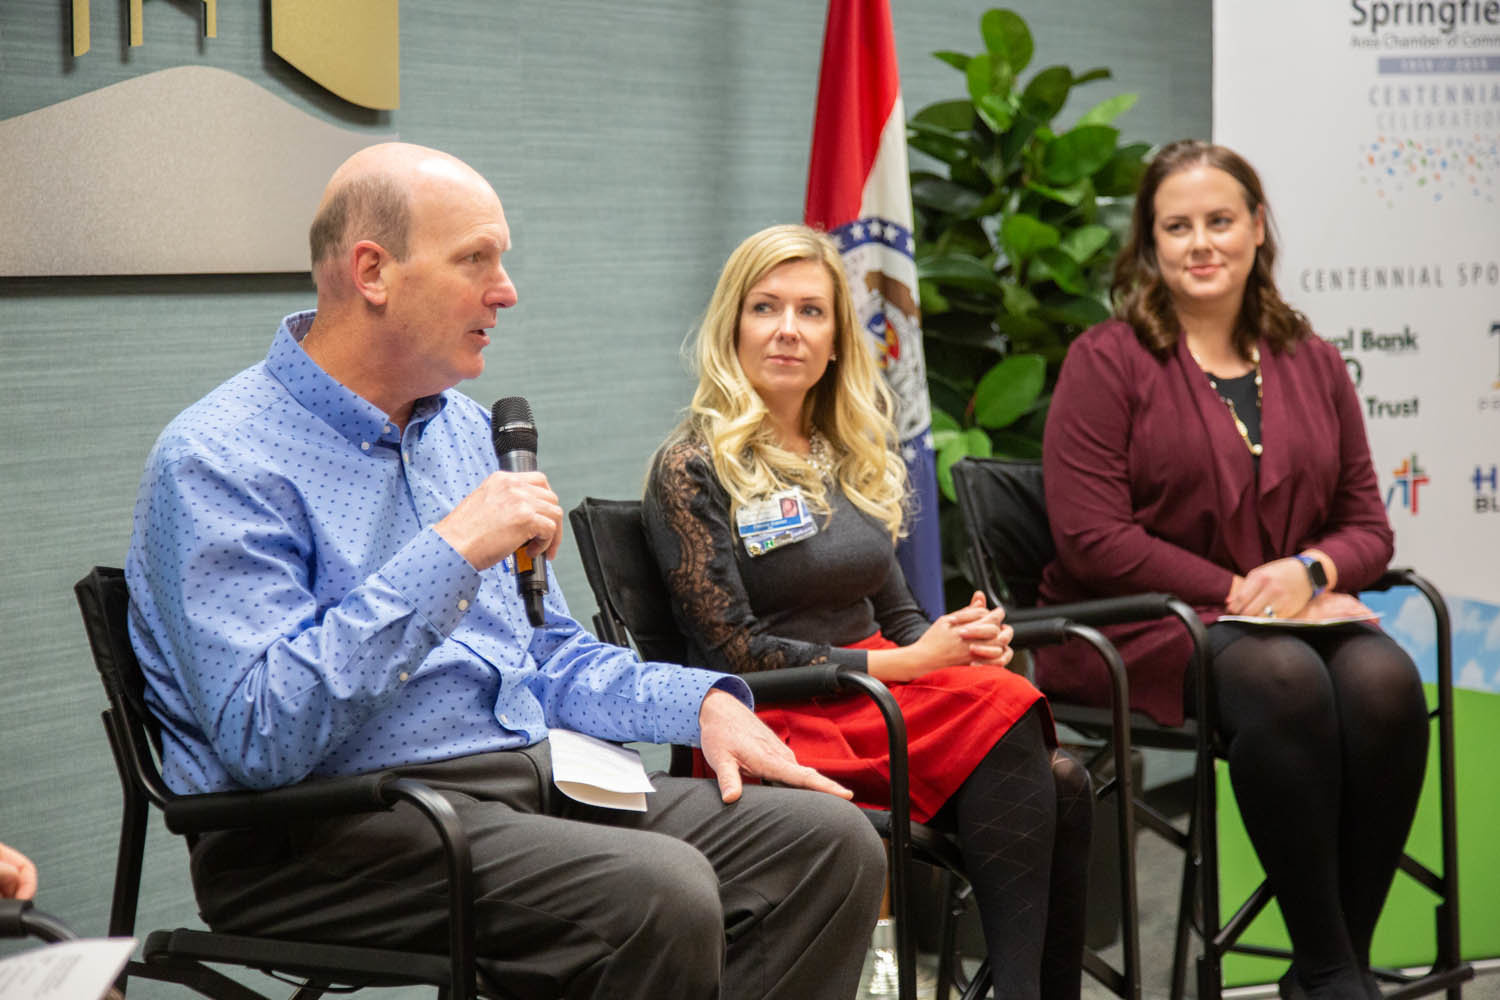 During a Springfield Area Chamber of Commerce discussion, Stephen Telscher, left, of Sapp Design Associates Architects, describes the firm’s talent attraction practices. Other panelists are CoxHealth’s Celeste Cramer and Kutak Rock’s Ashley Norgard.